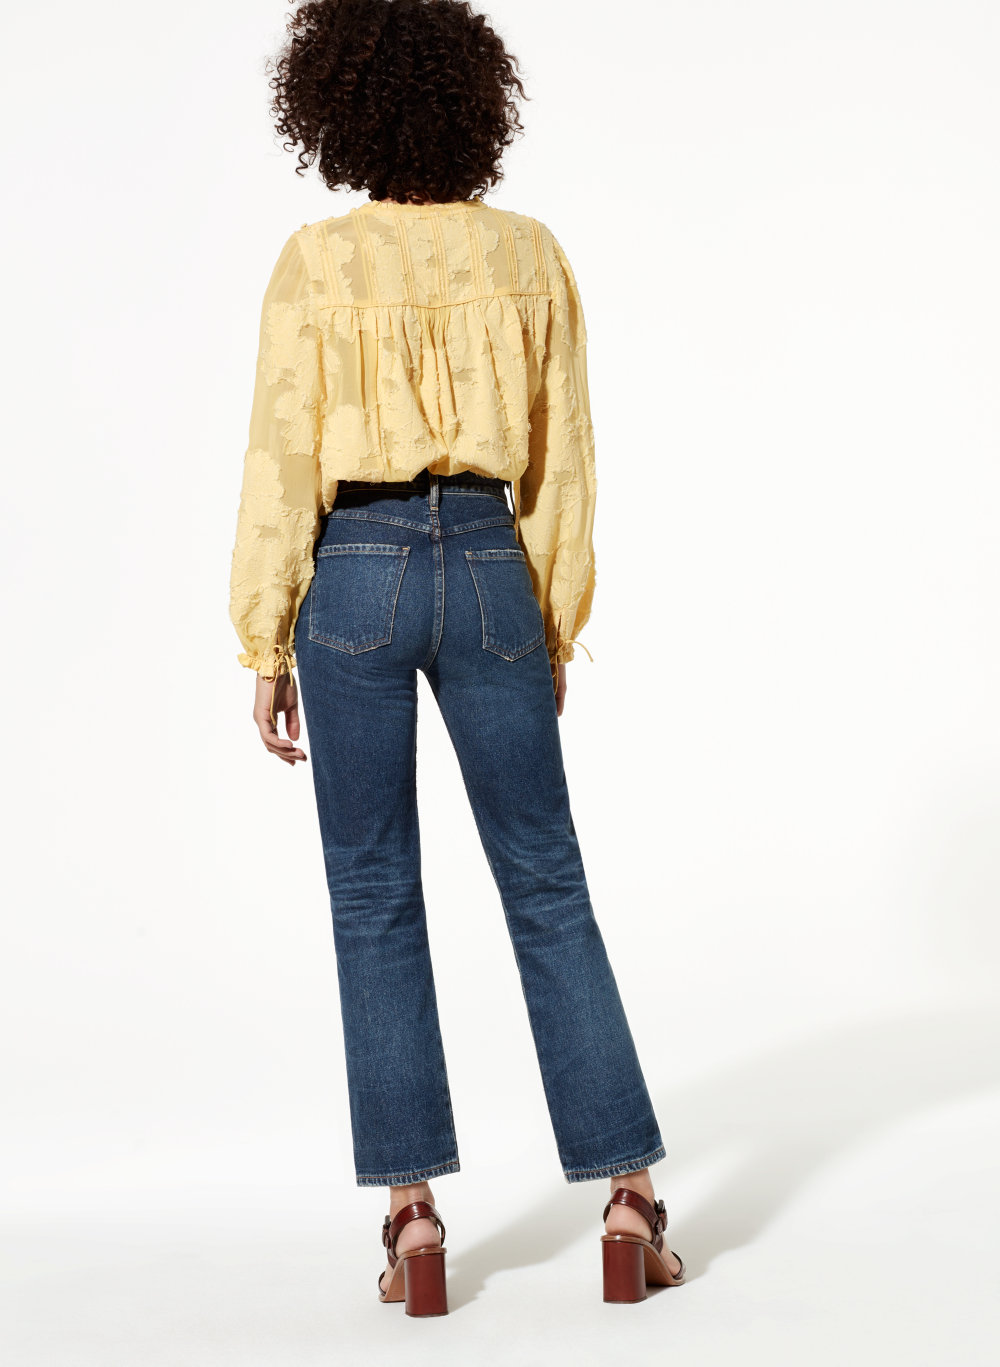 Wilfred/Citizens of Humanity LIV VINTAGE BLUE | Aritzia